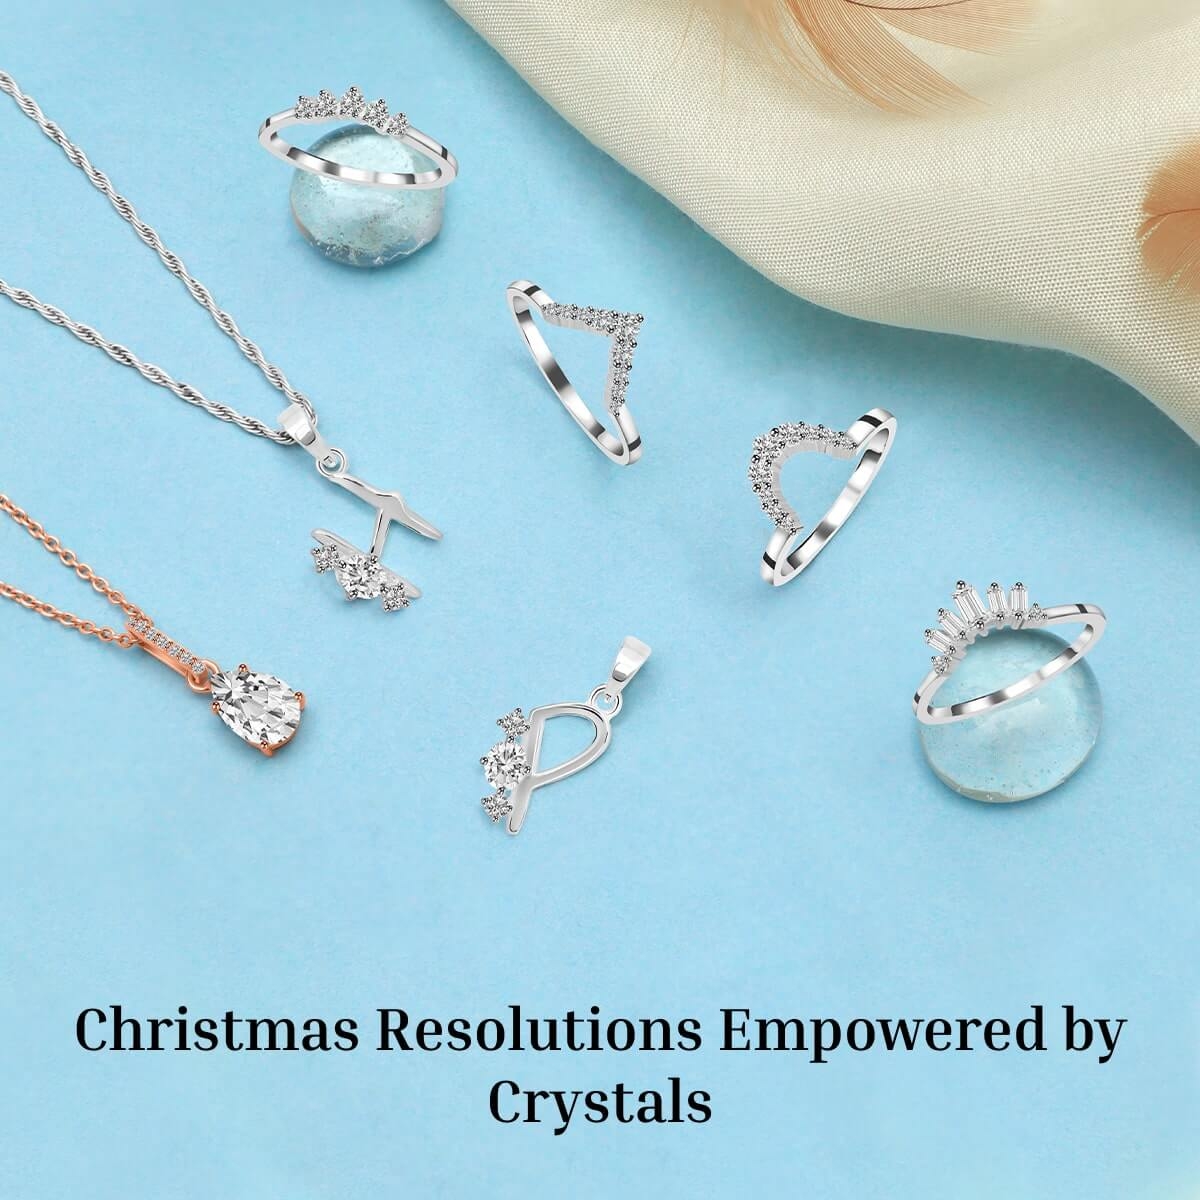 Healing Crystals To Help With Christmas Resolutions